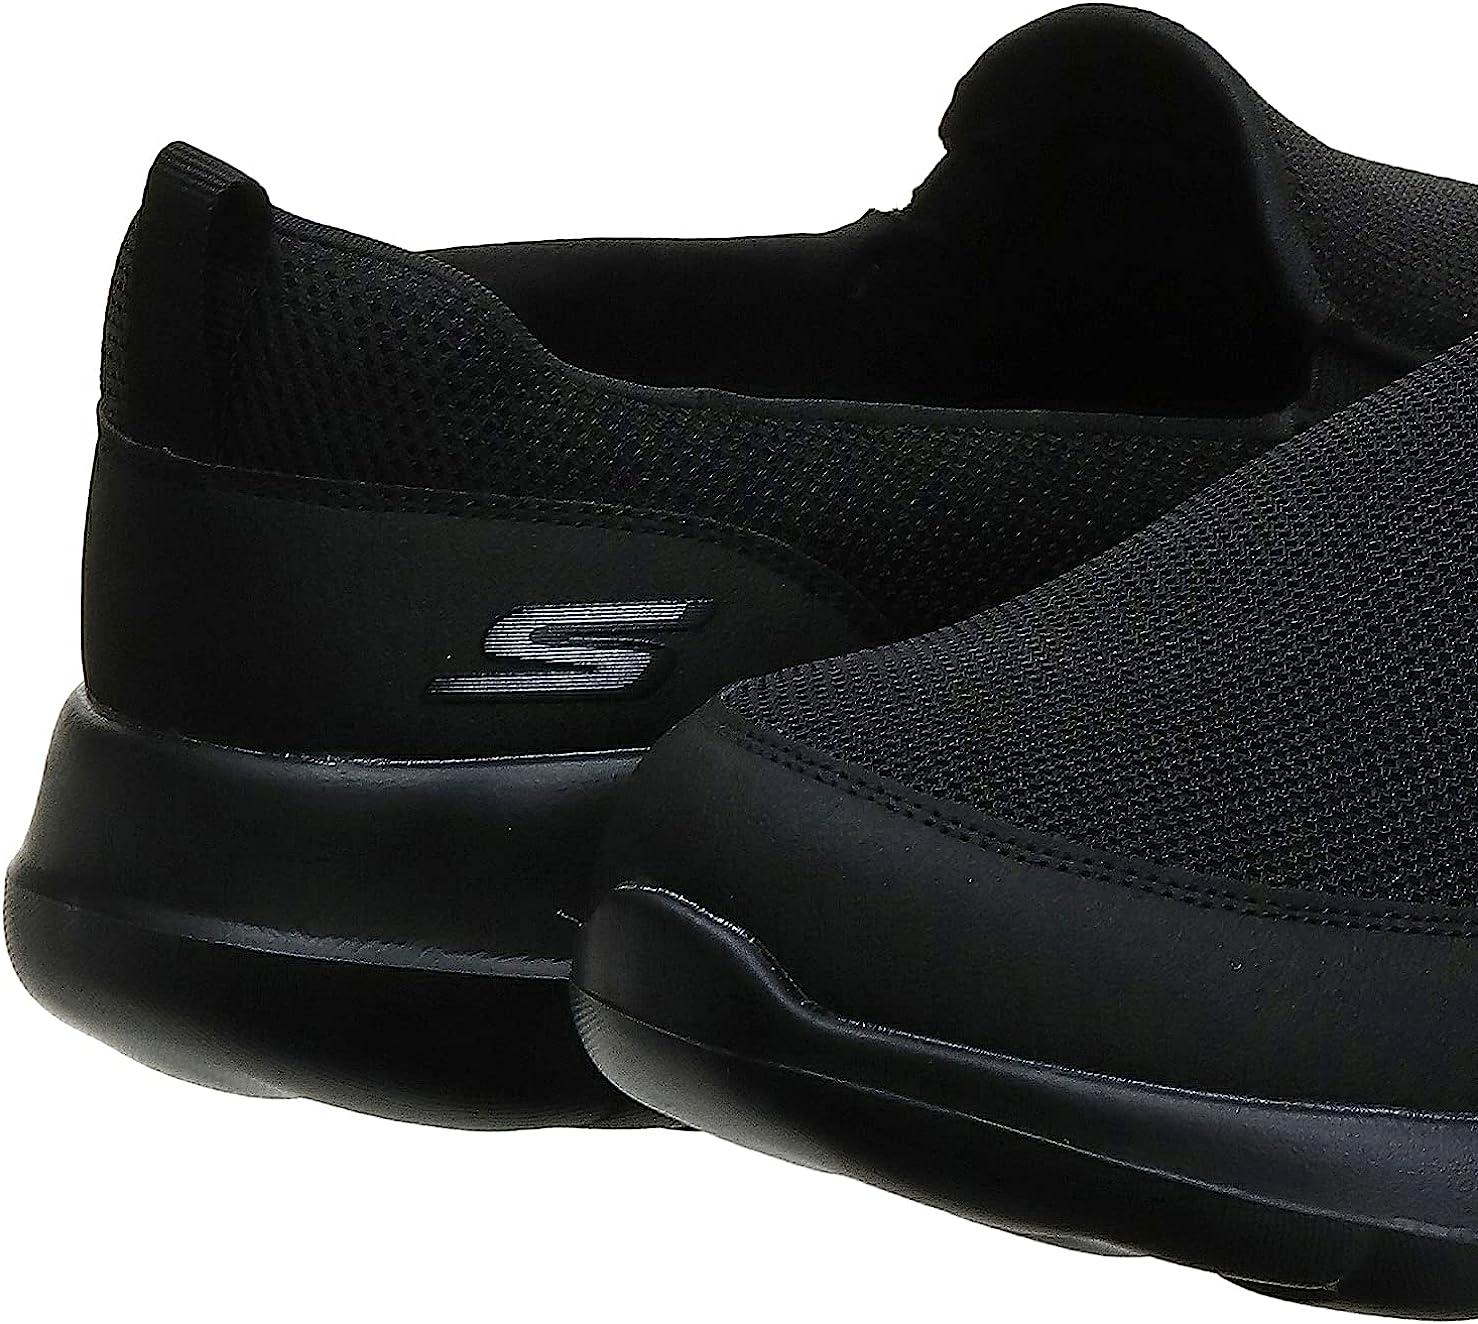 Skechers Men's Go Max Clinched-Athletic Mesh Double Gore Slip on